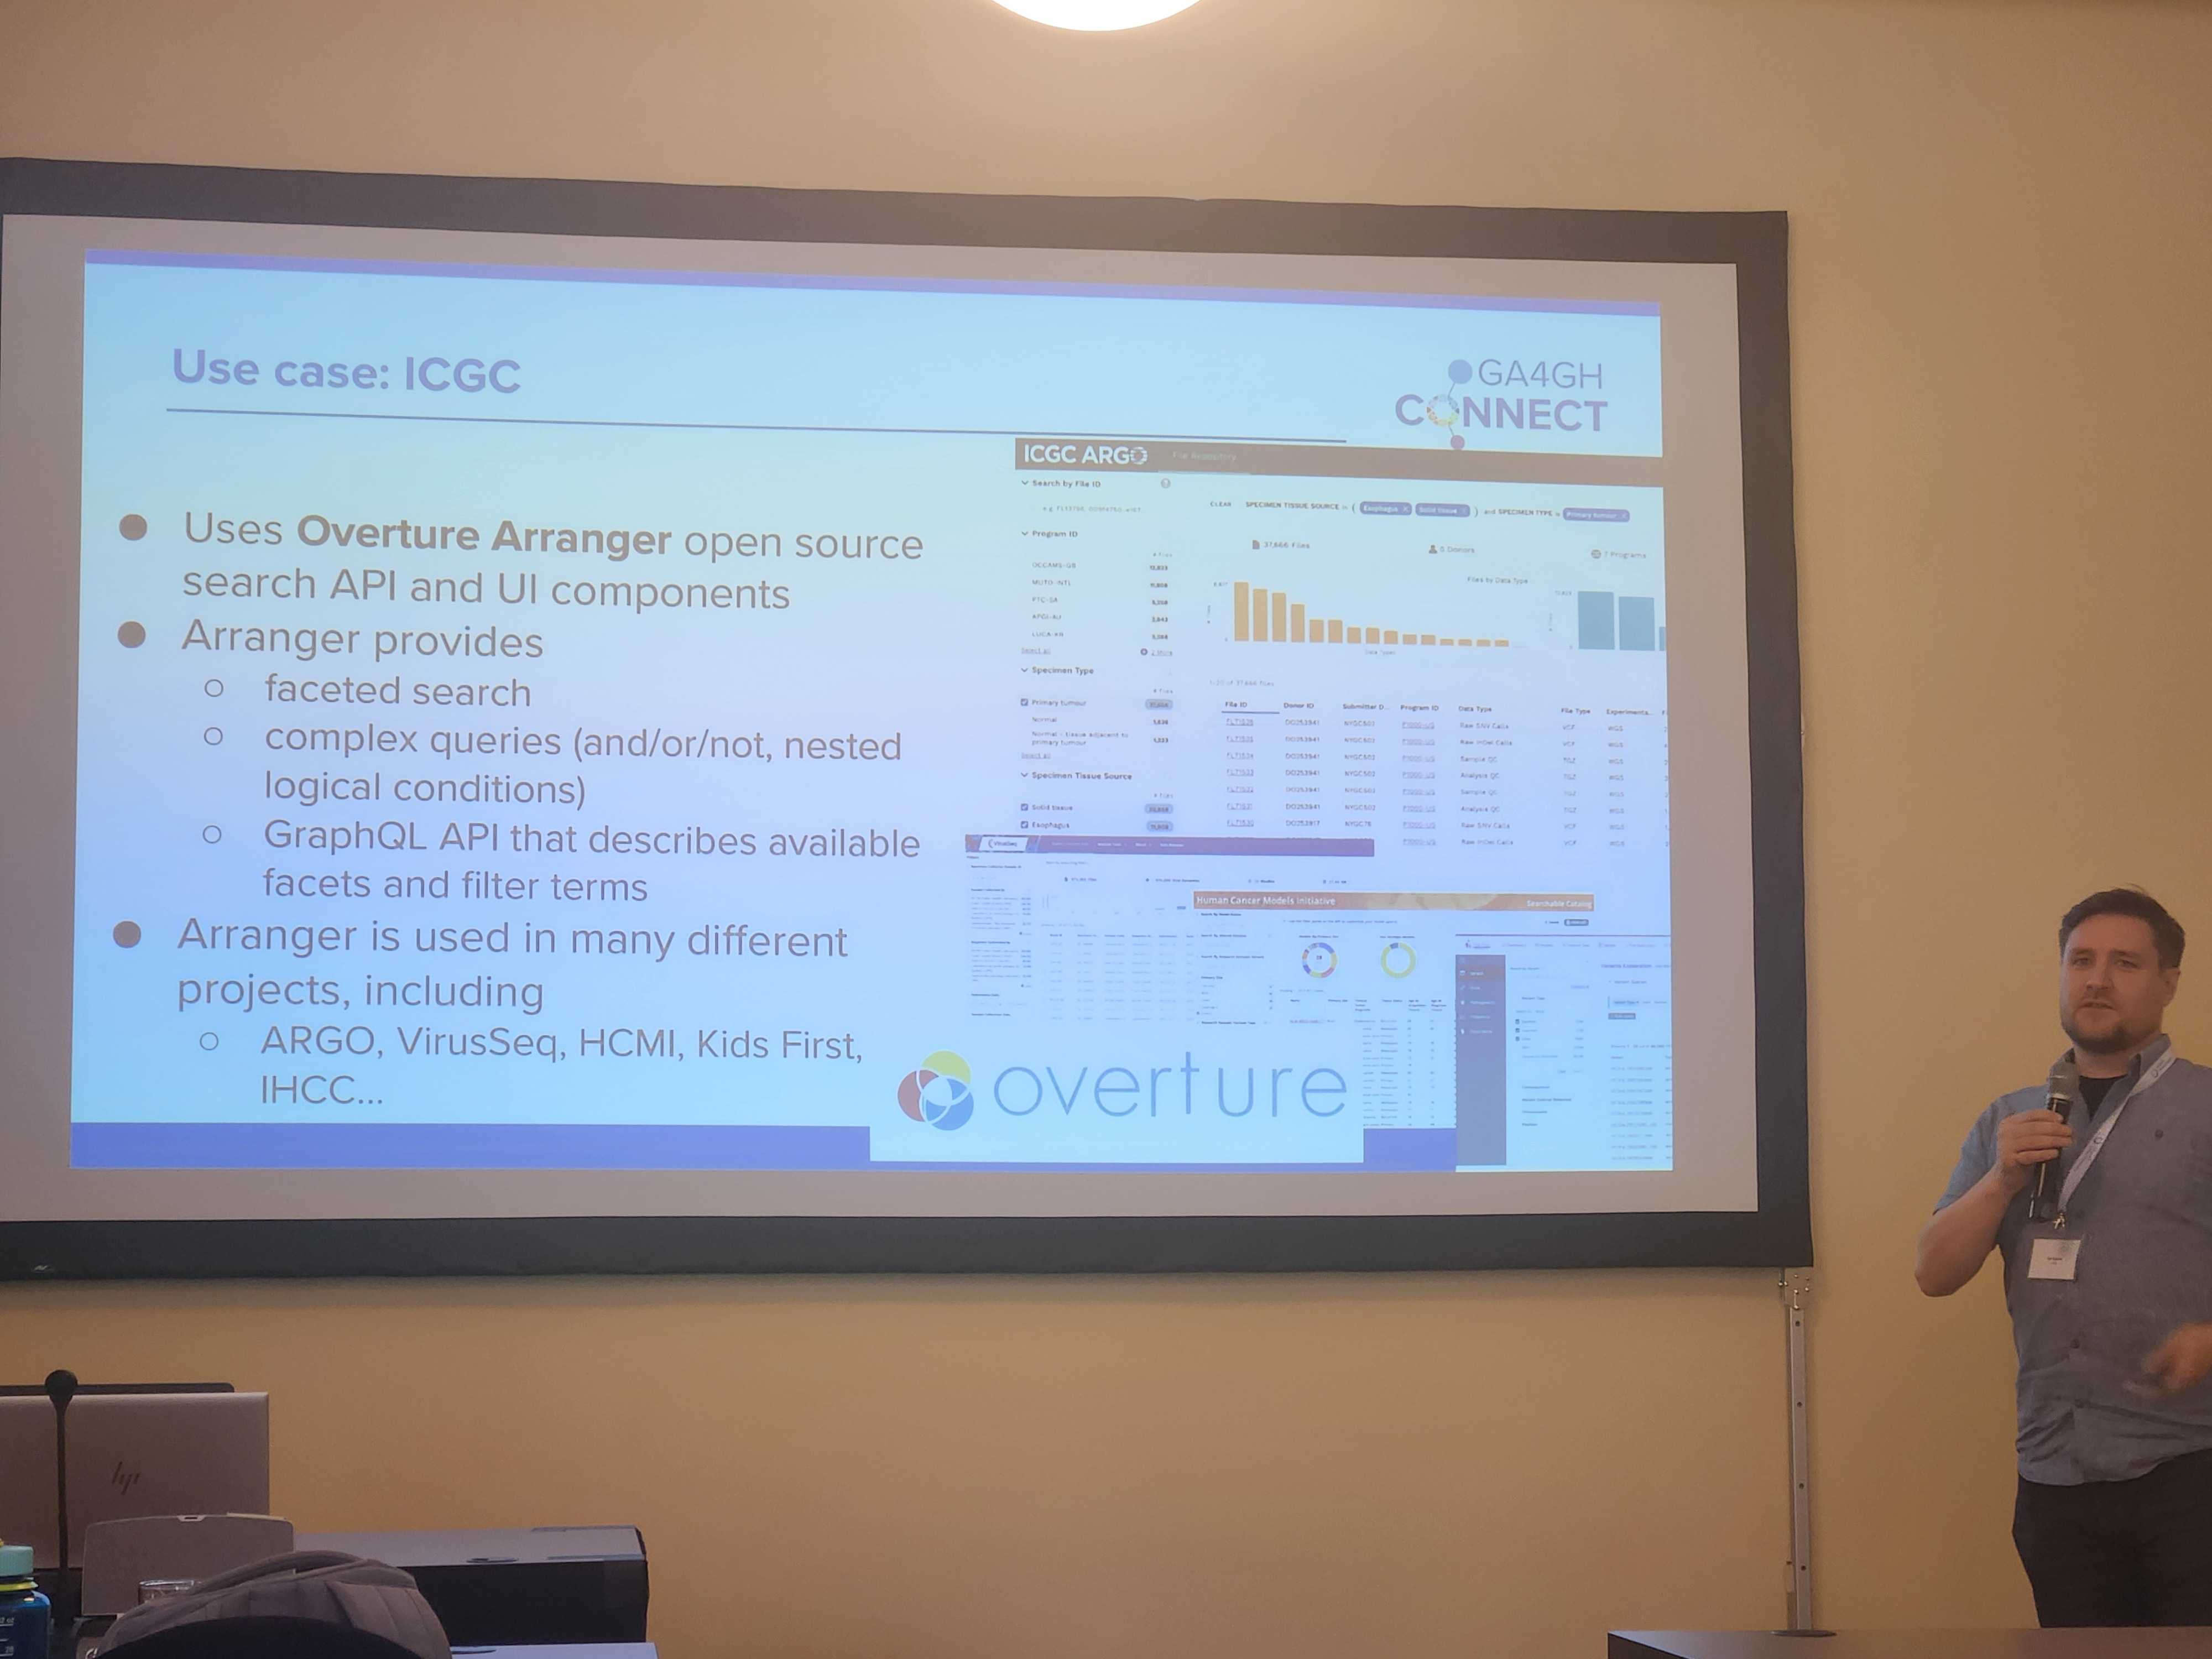 Jon presenting on Overture at GA4GH Connect in Ascona